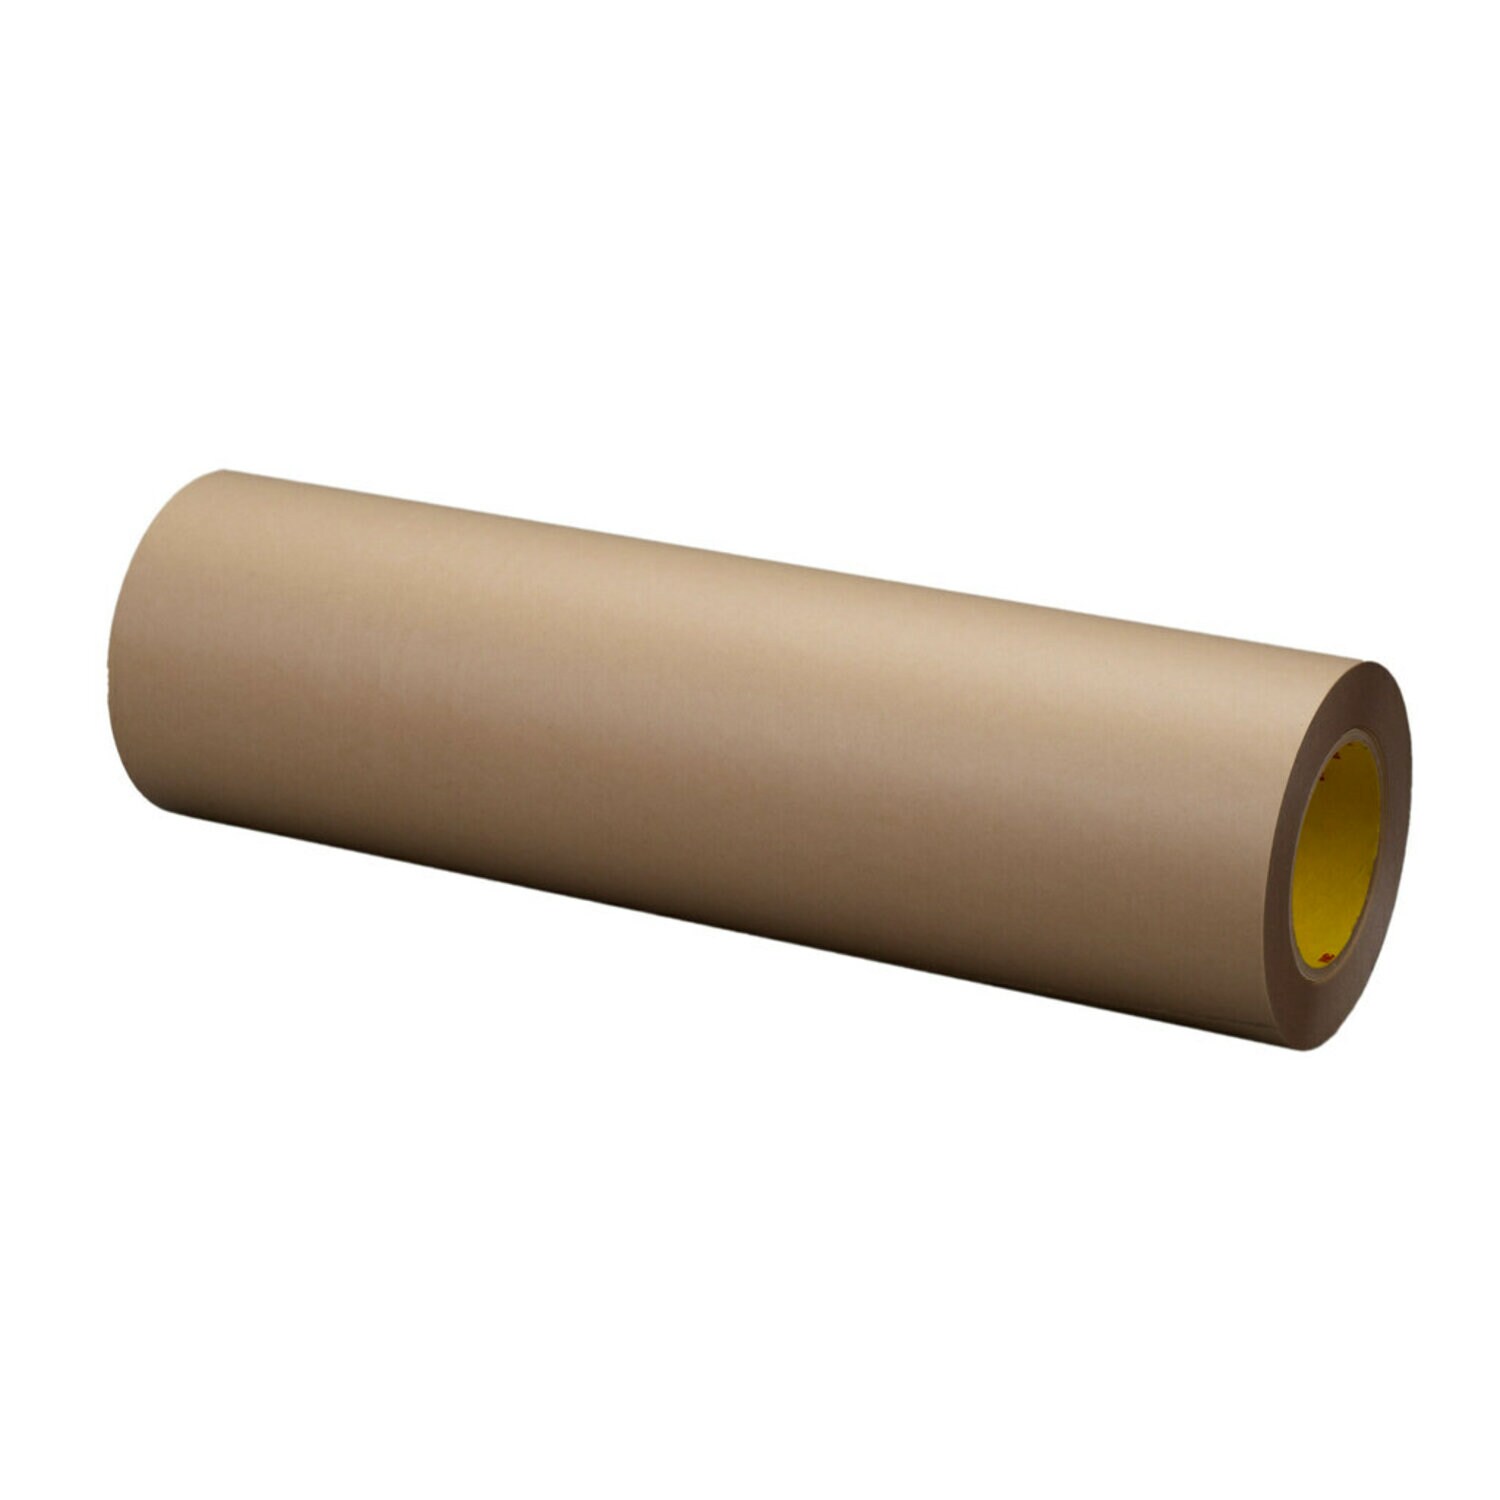 7100132980 - 3M Thin Flexographic Plate Mounting Tape E2105, Translucent, 5 mil,
Roll, Config